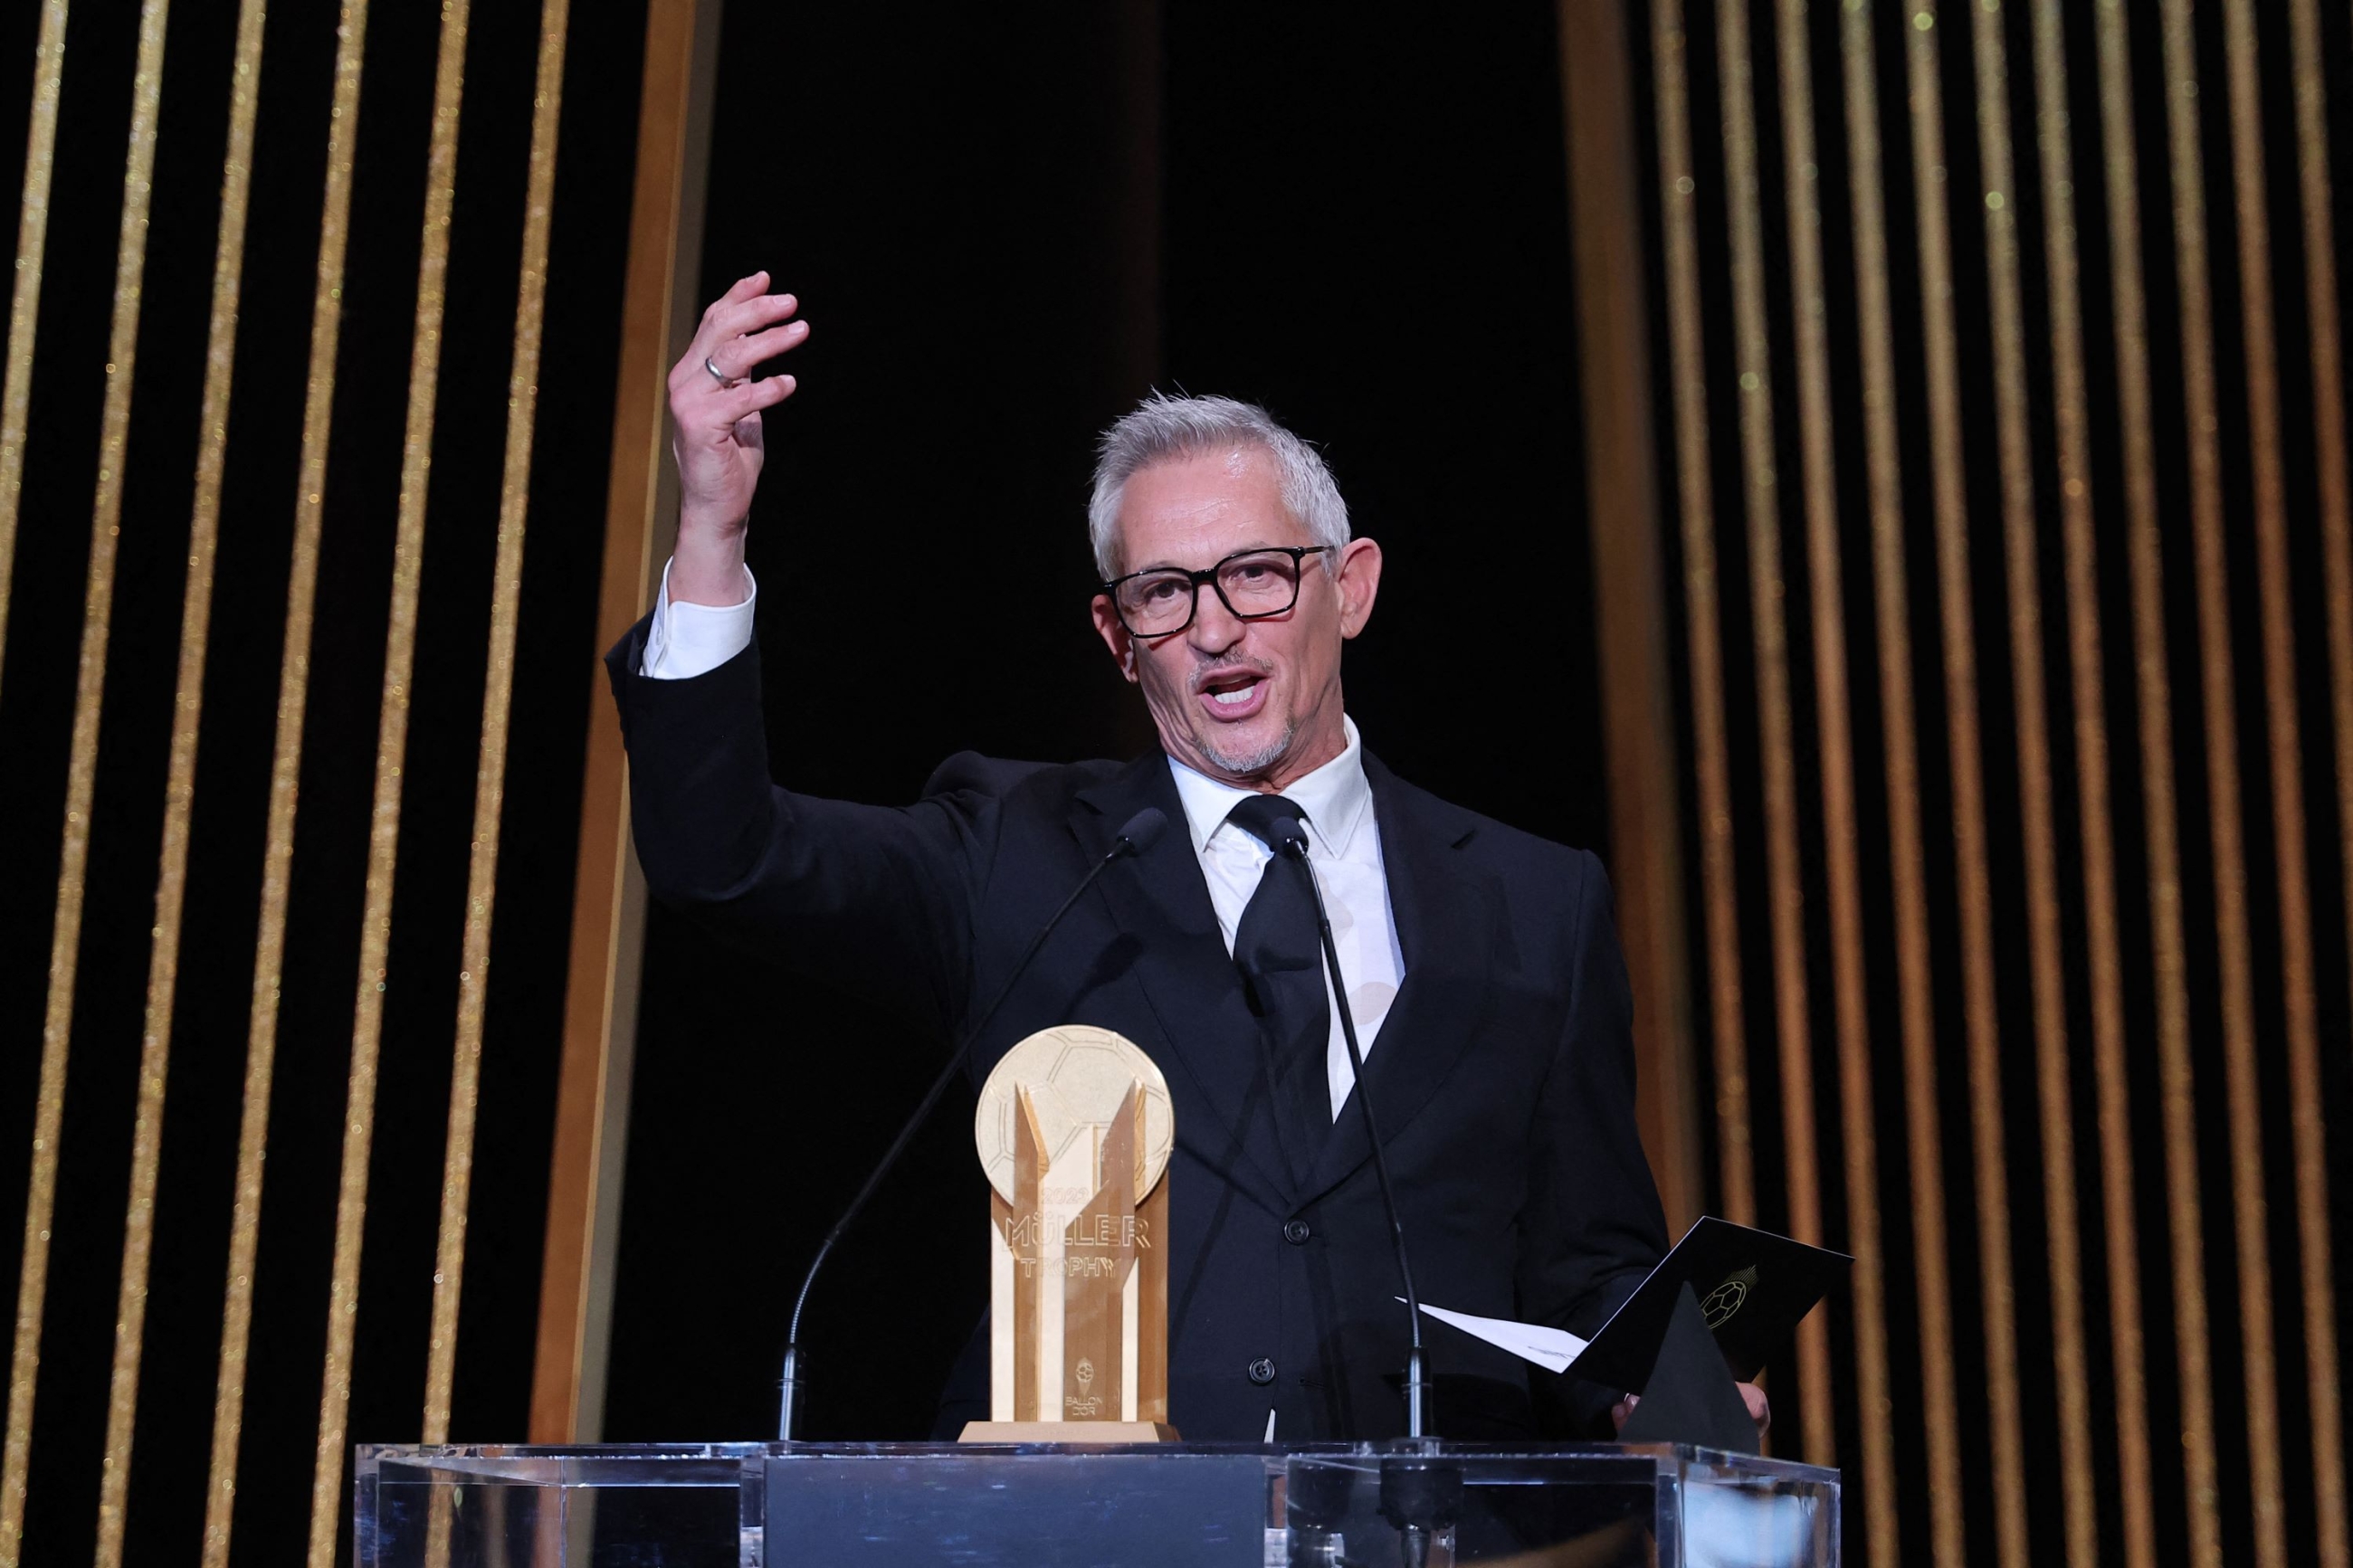 Gary Lineker, former England footballer turned sports TV presenter, gestures on stage with the Gerd Muller Trophy for best striker during the 2023 Ballon d'Or France Football award ceremony at the Theatre du Chatelet in Paris on October 30, 2023 (Franck Fife/AFP)